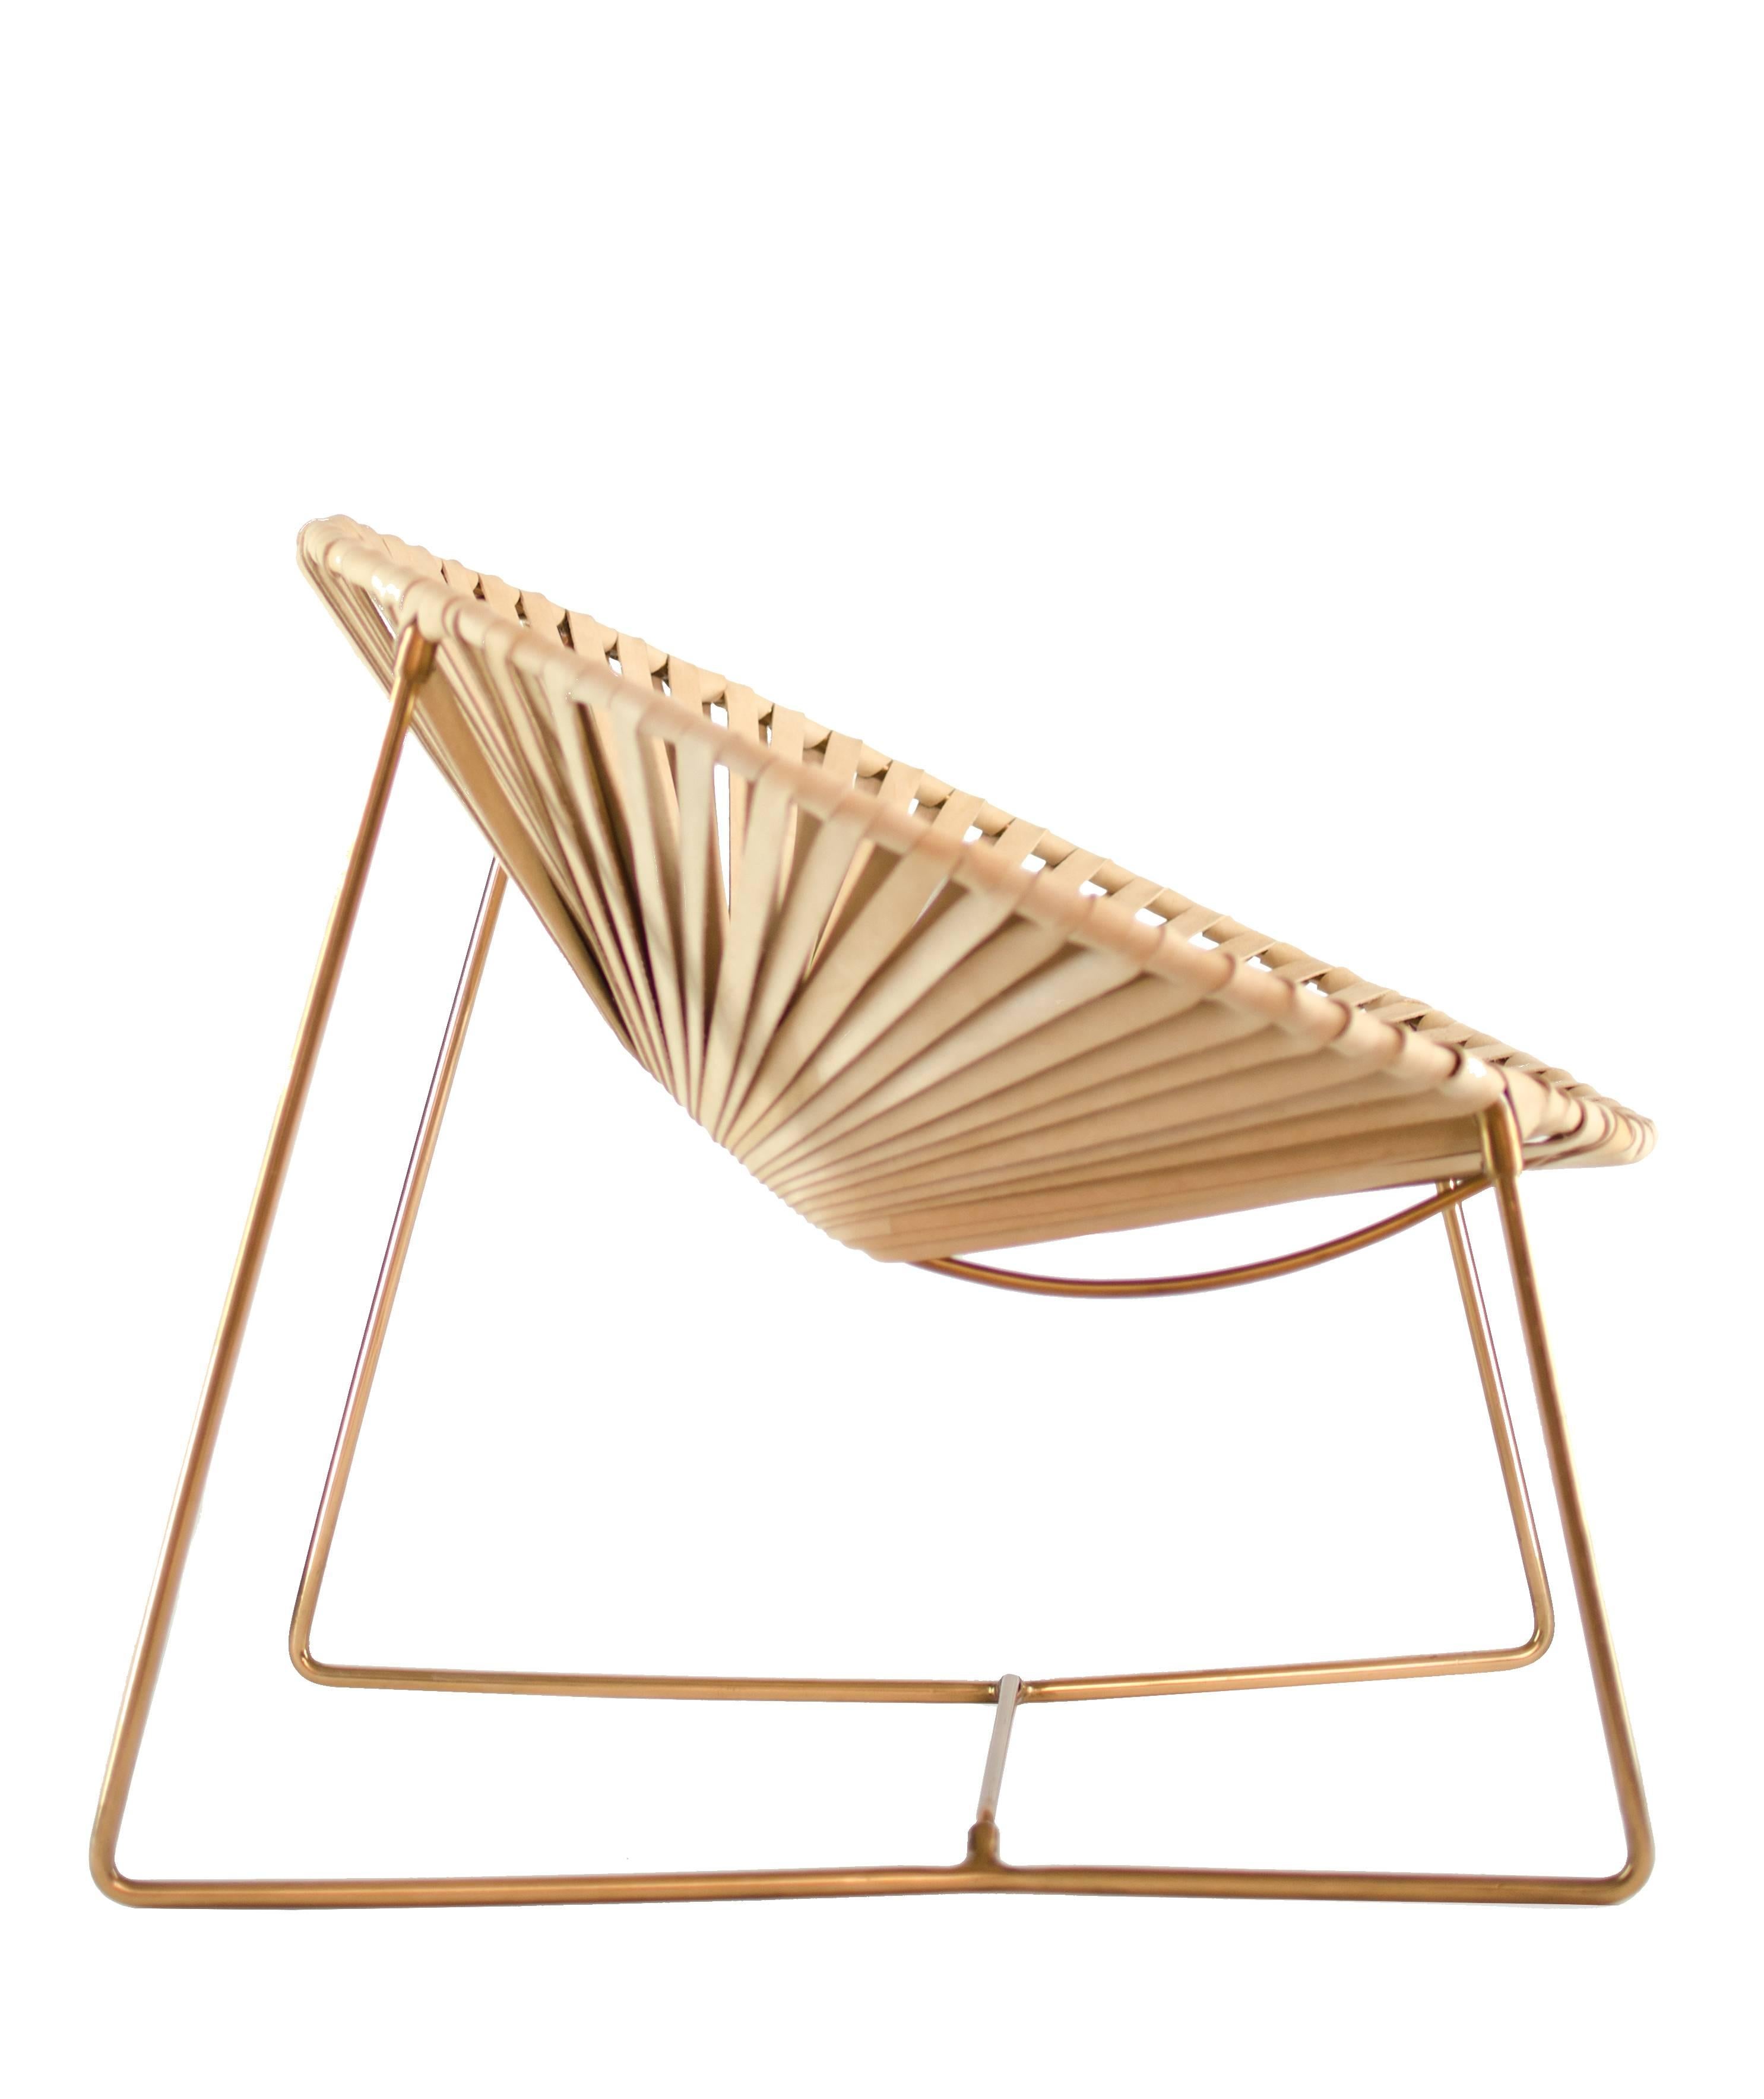 This chair is a unique creation by Leon Leon Design from Mexico City, a modern version of the famous Acapulco chair with a wider and more inclined seat and new materials.
It features a copper-plated structure, powder-coated with transparent lacquer